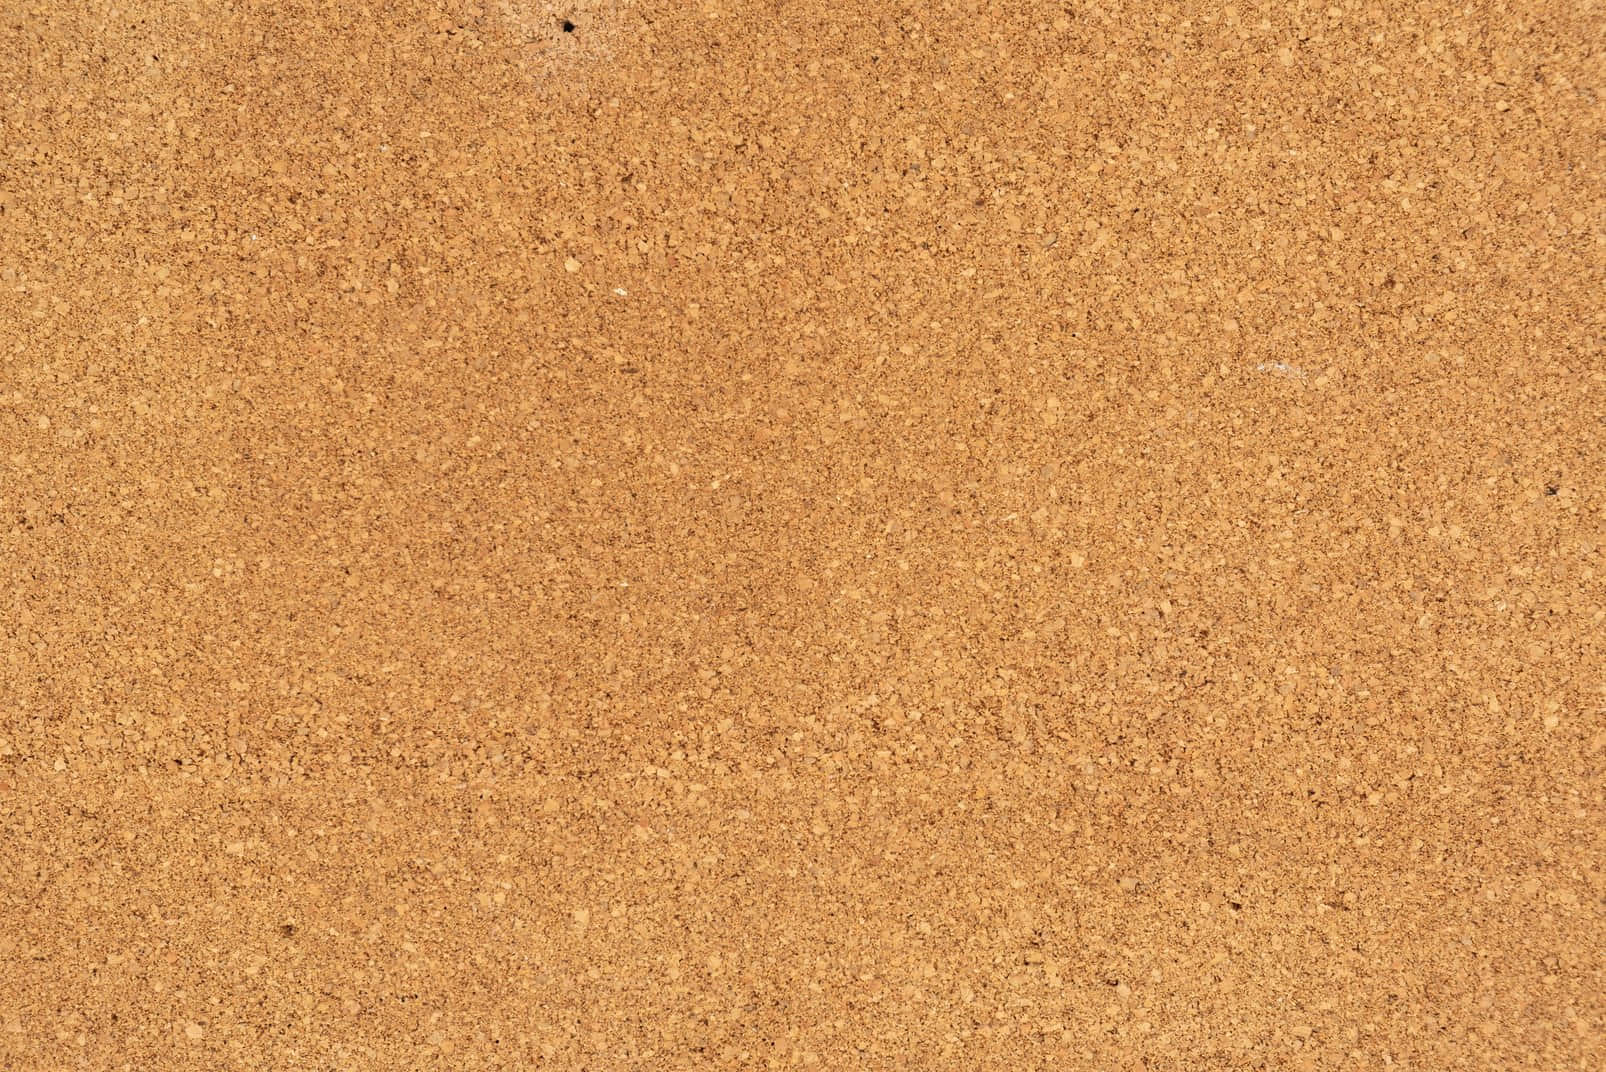 A Close Up Of A Brown Surface